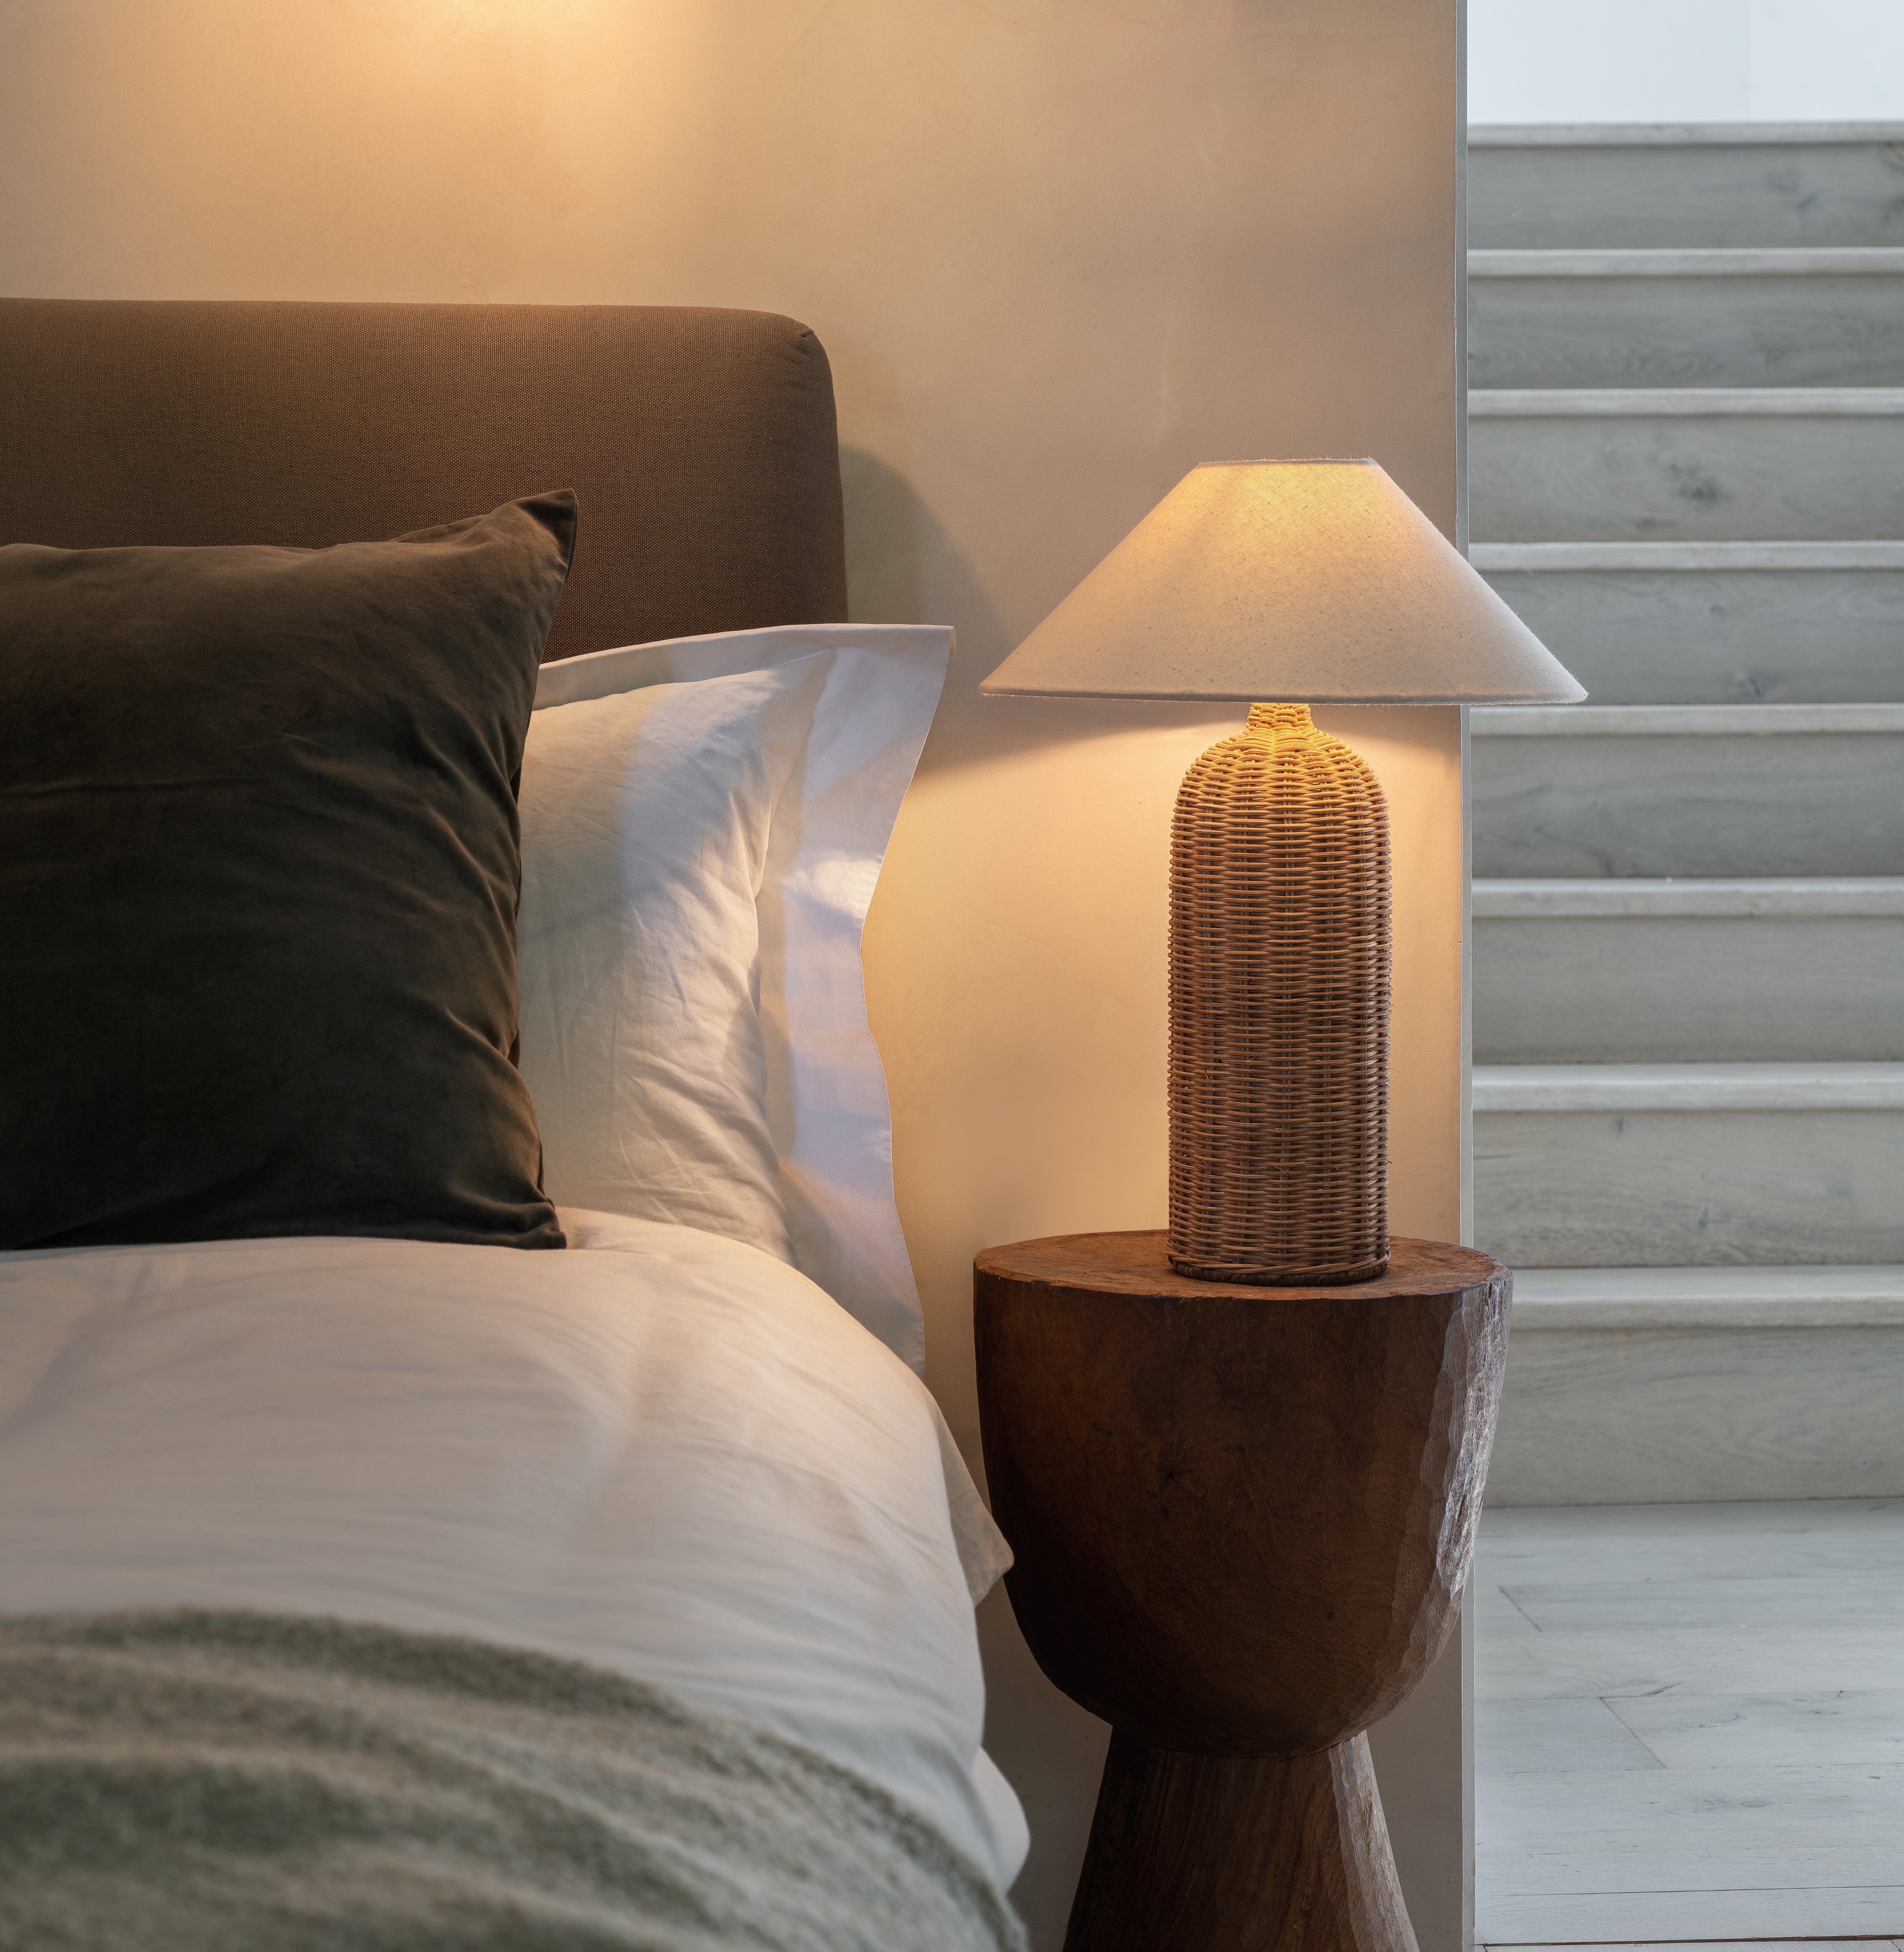 The Ensia rattan-based table lamp gives a room a warm and tranquil light